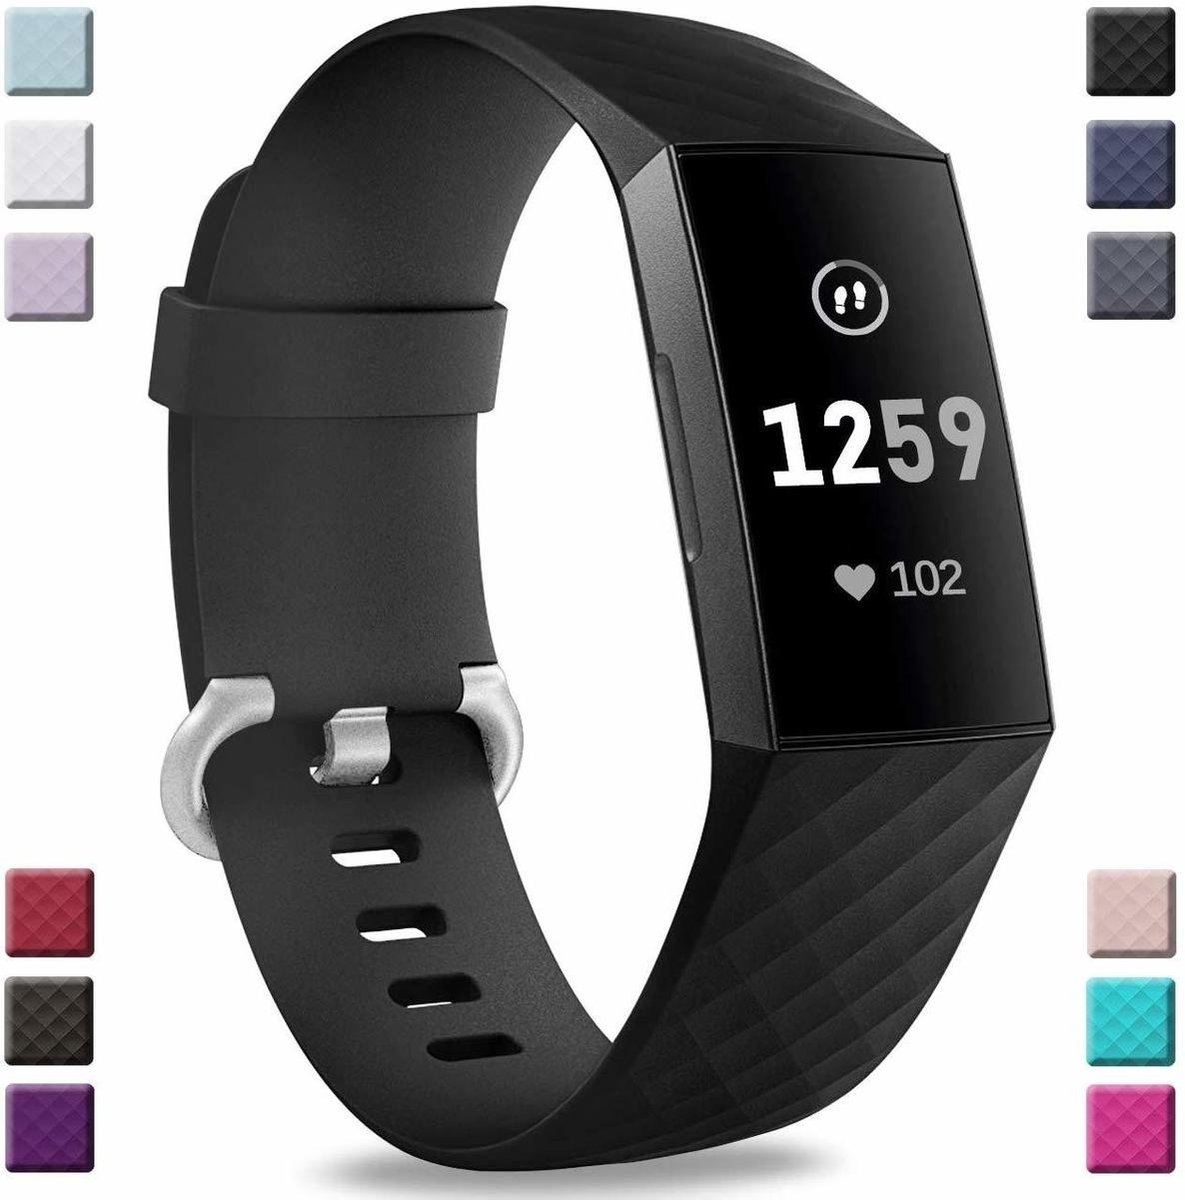 Fitbit Charge 3 silicone band (zwart) - Afmetingen: Maat S | bol